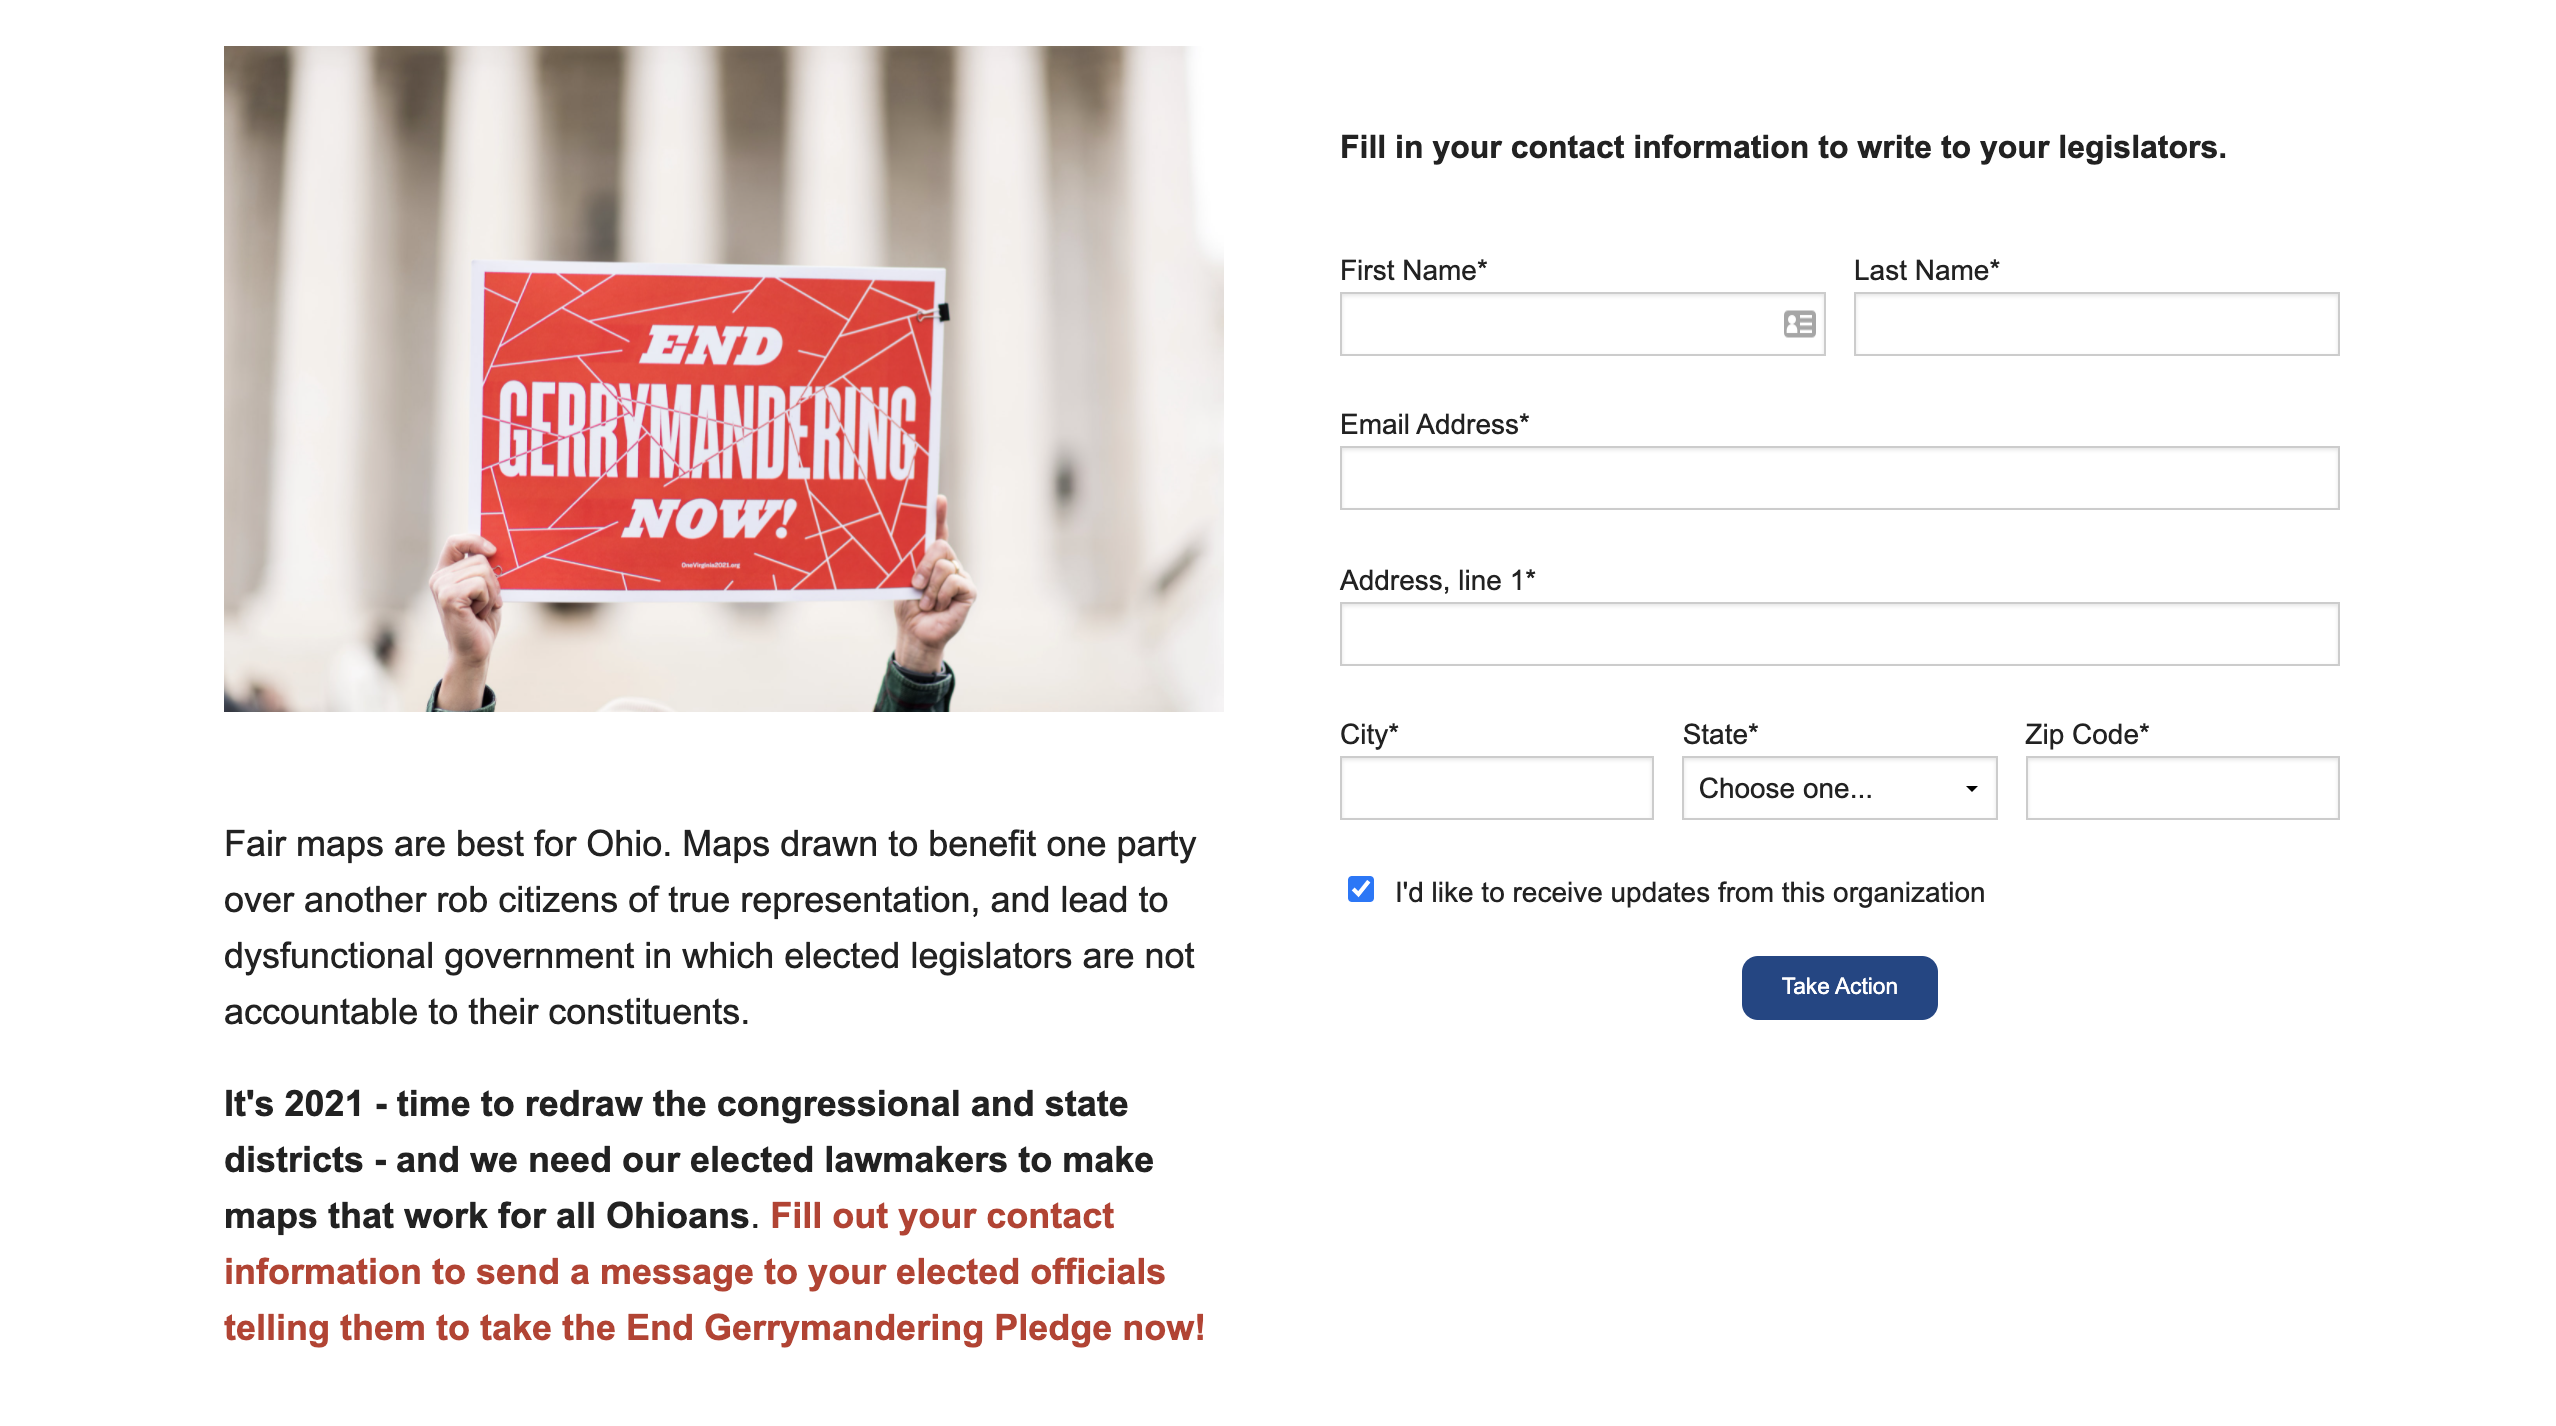 The League of Women Voters in Ohio encourages citizens to contact their election officials to take a pledge to end gerrymandering. <a href="http://It's 2021 - time to redraw the congressional and state districts - and we need our elected lawmakers to make maps that work for all Ohioans. Fill out your contact information to send a message to your elected officials telling them to take the End Gerrymandering Pledge now!" target="_blank" rel="noreferrer noopener">"It is time to redraw the congressional and state districts - and we need our elected lawmakers to make maps that work for all Ohioans. Fill out your contact information to send a message to your elected officials telling them to take the End Gerrymandering Pledge now!"